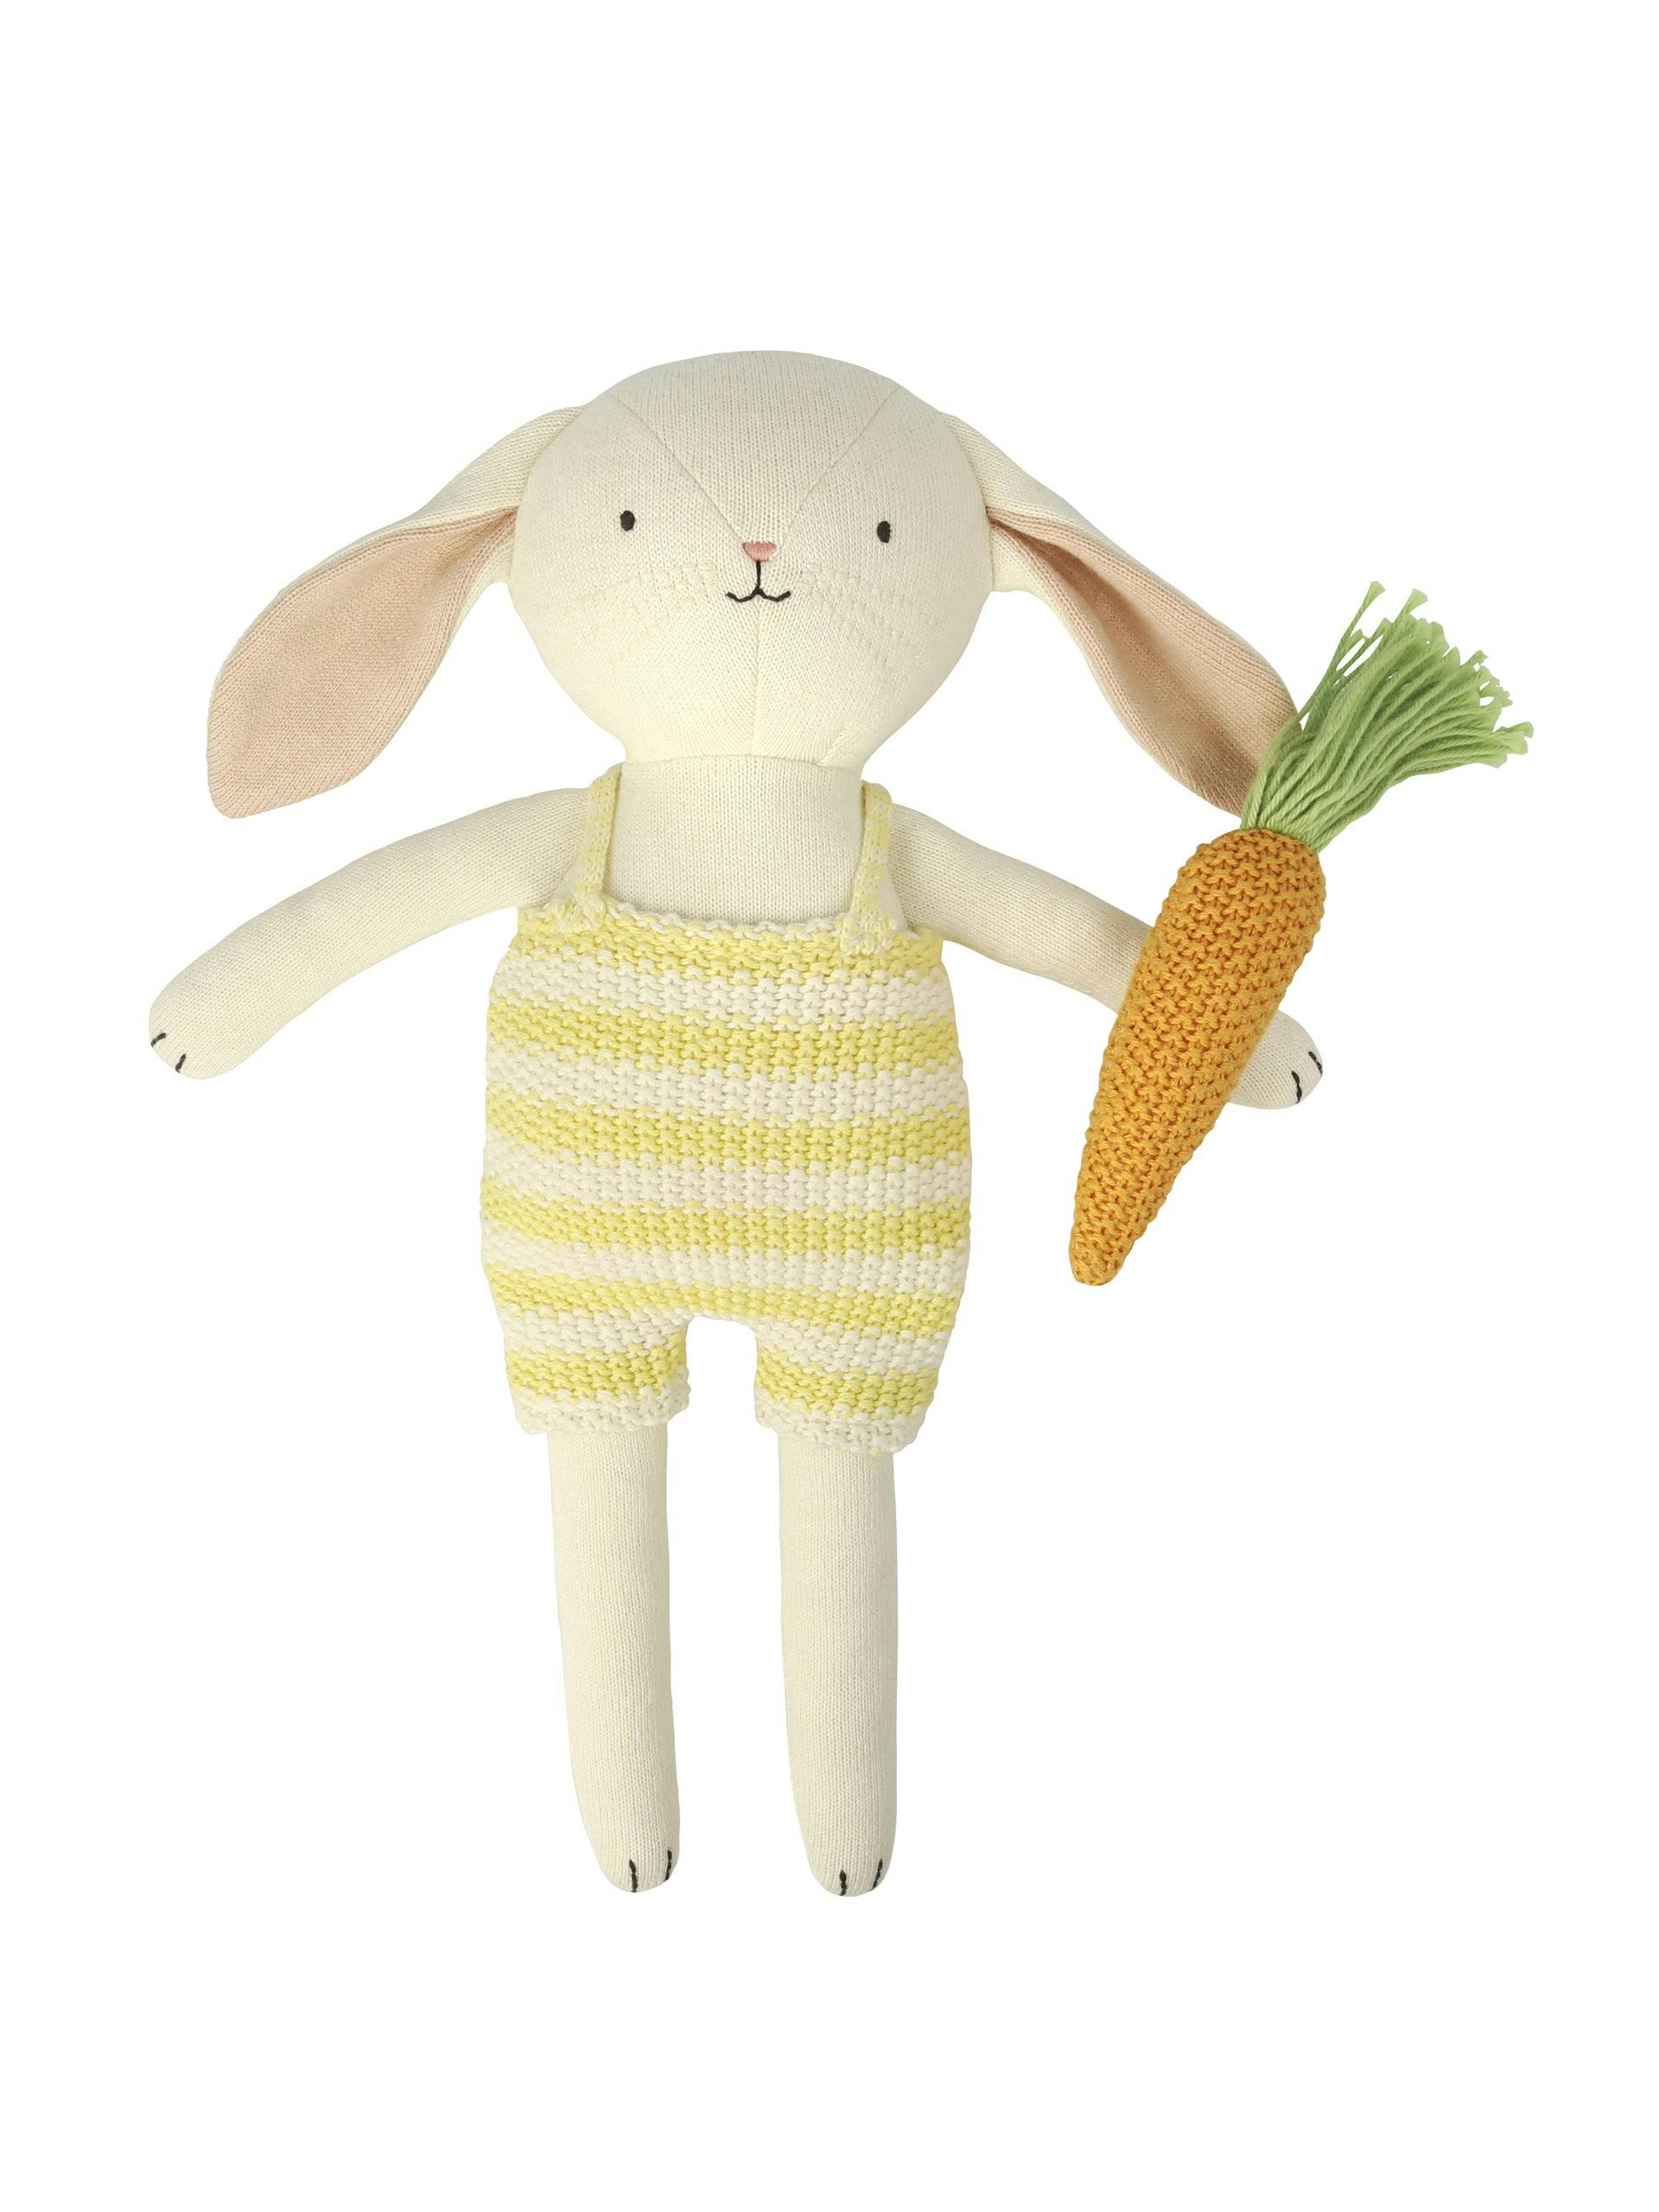 Knitted bunny toy